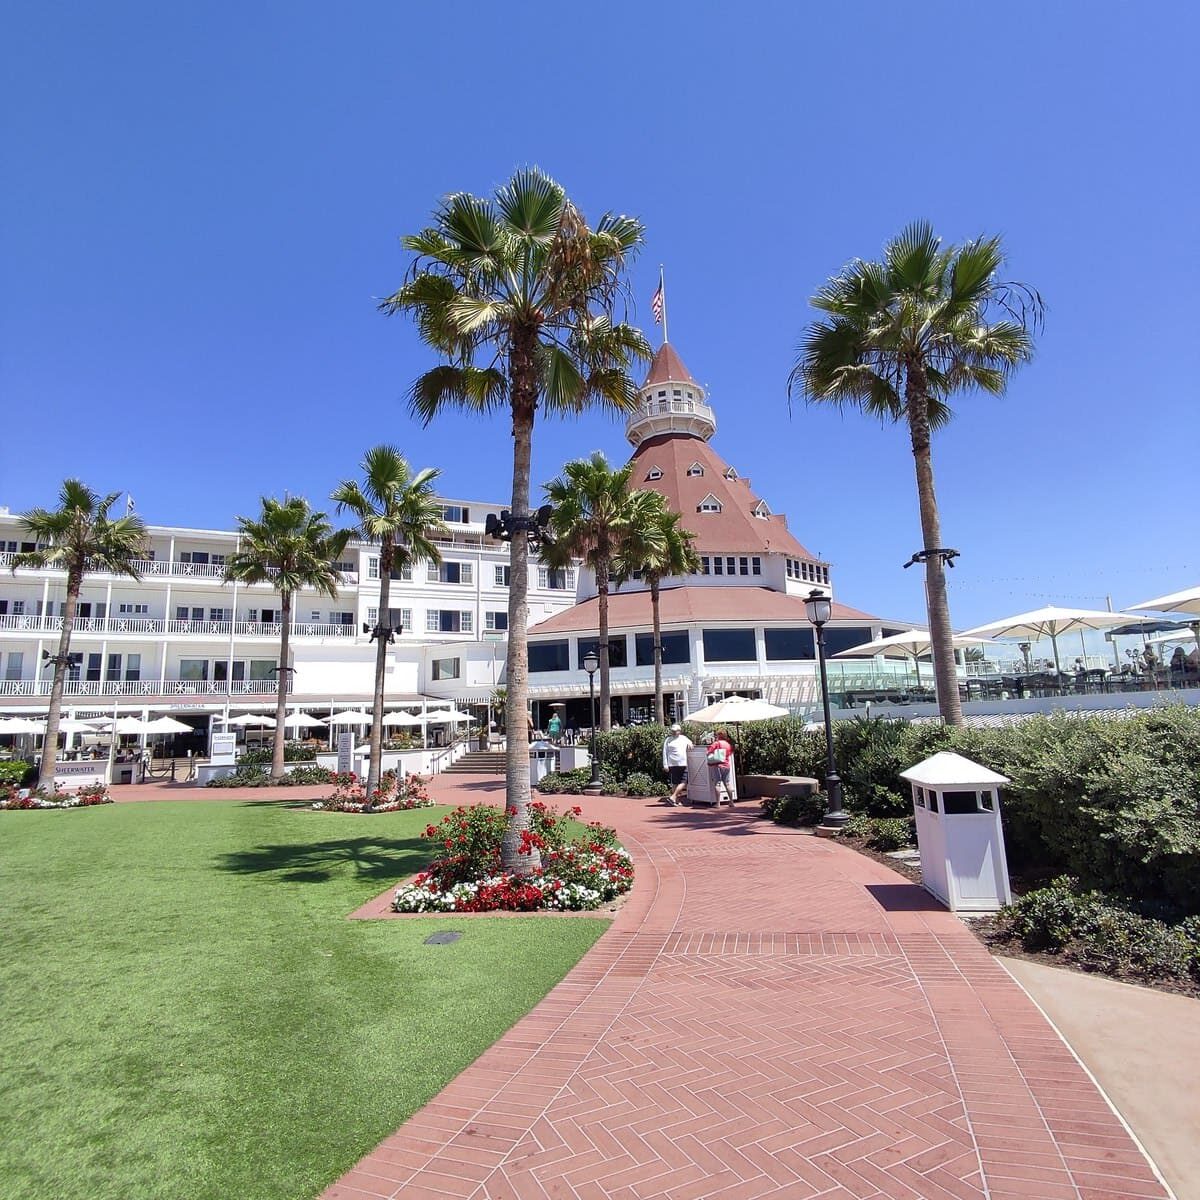 Hotel Del Coronado with white building, red roofs, and manicured gardens